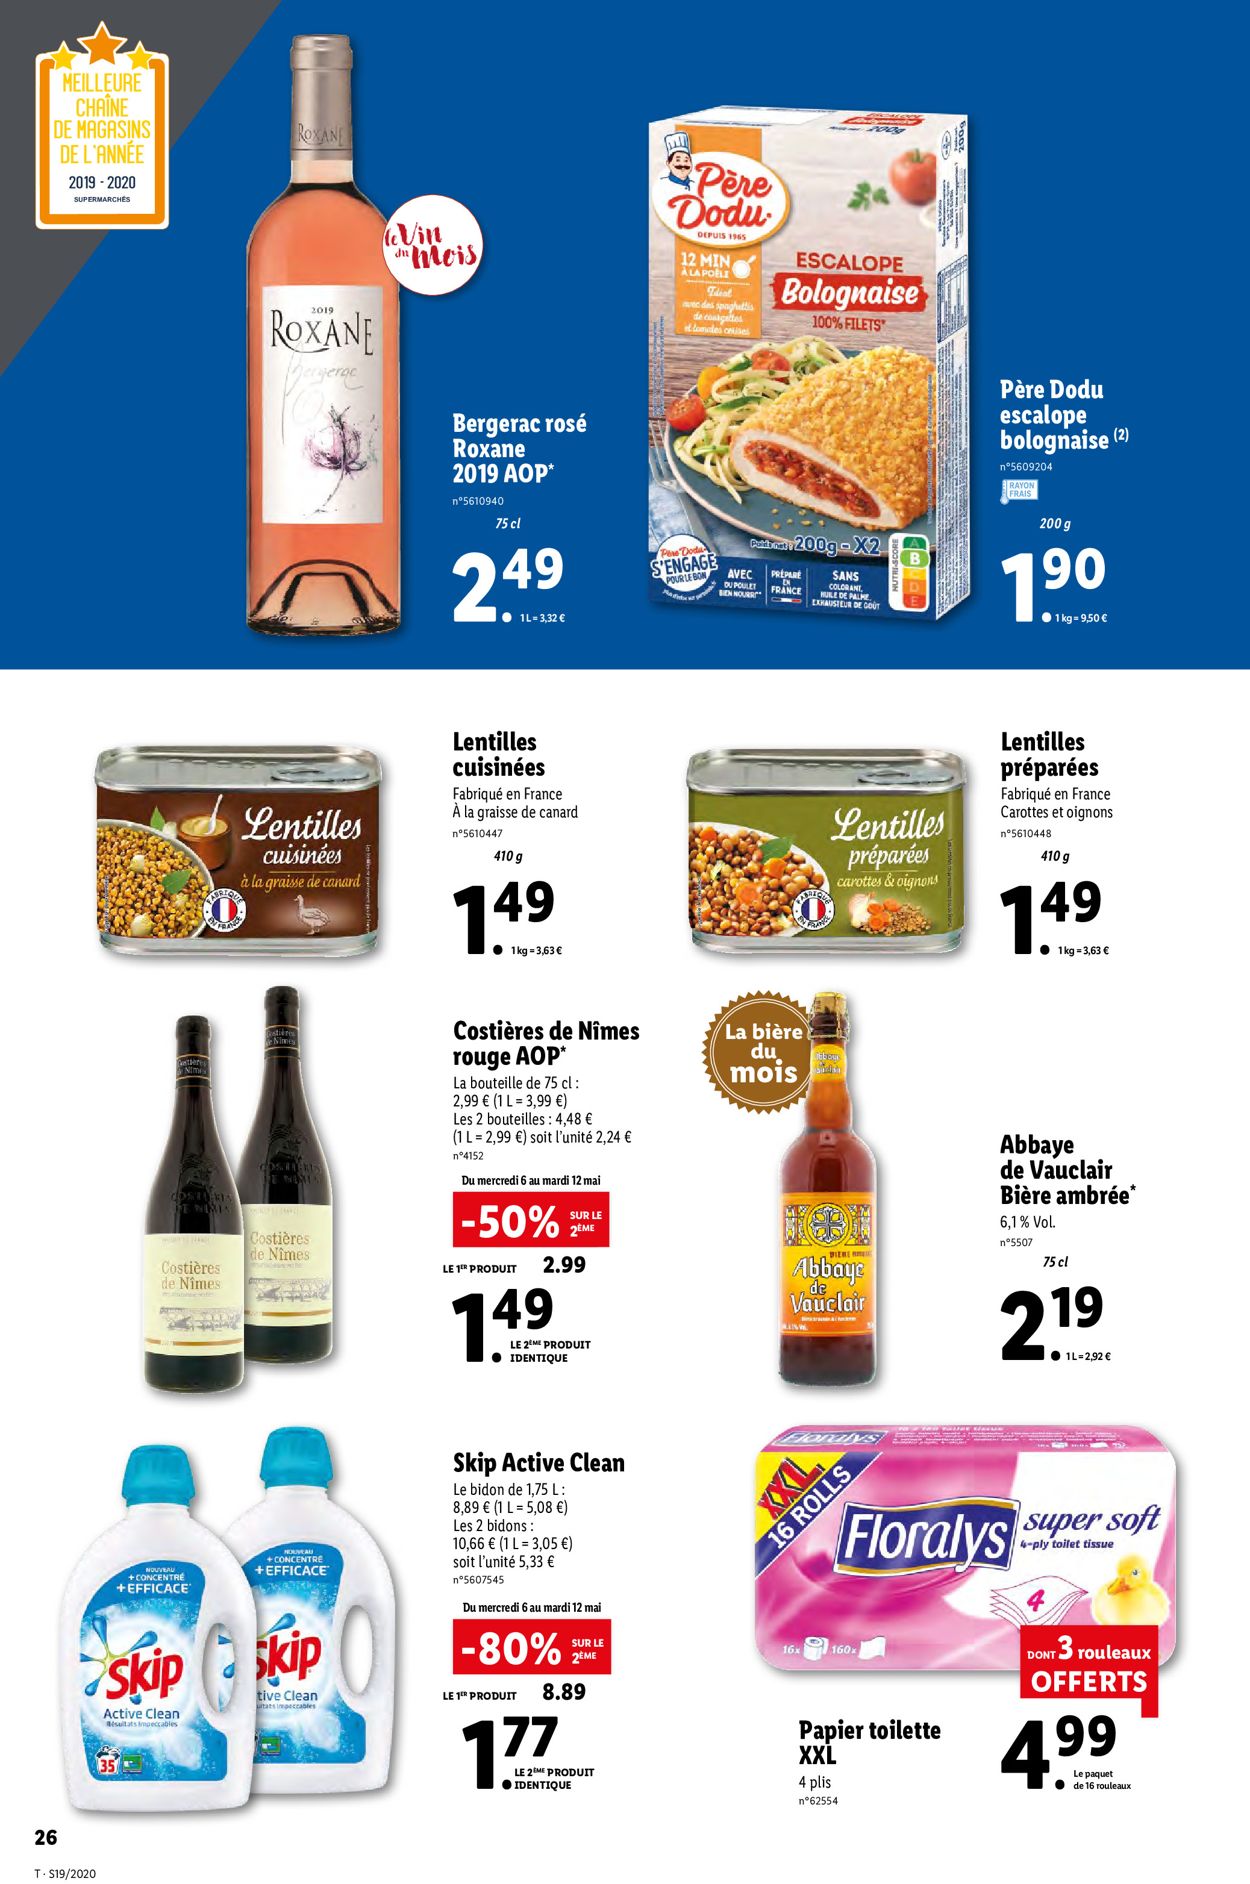 Lidl Catalogue - 06.05-12.05.2020 (Page 26)